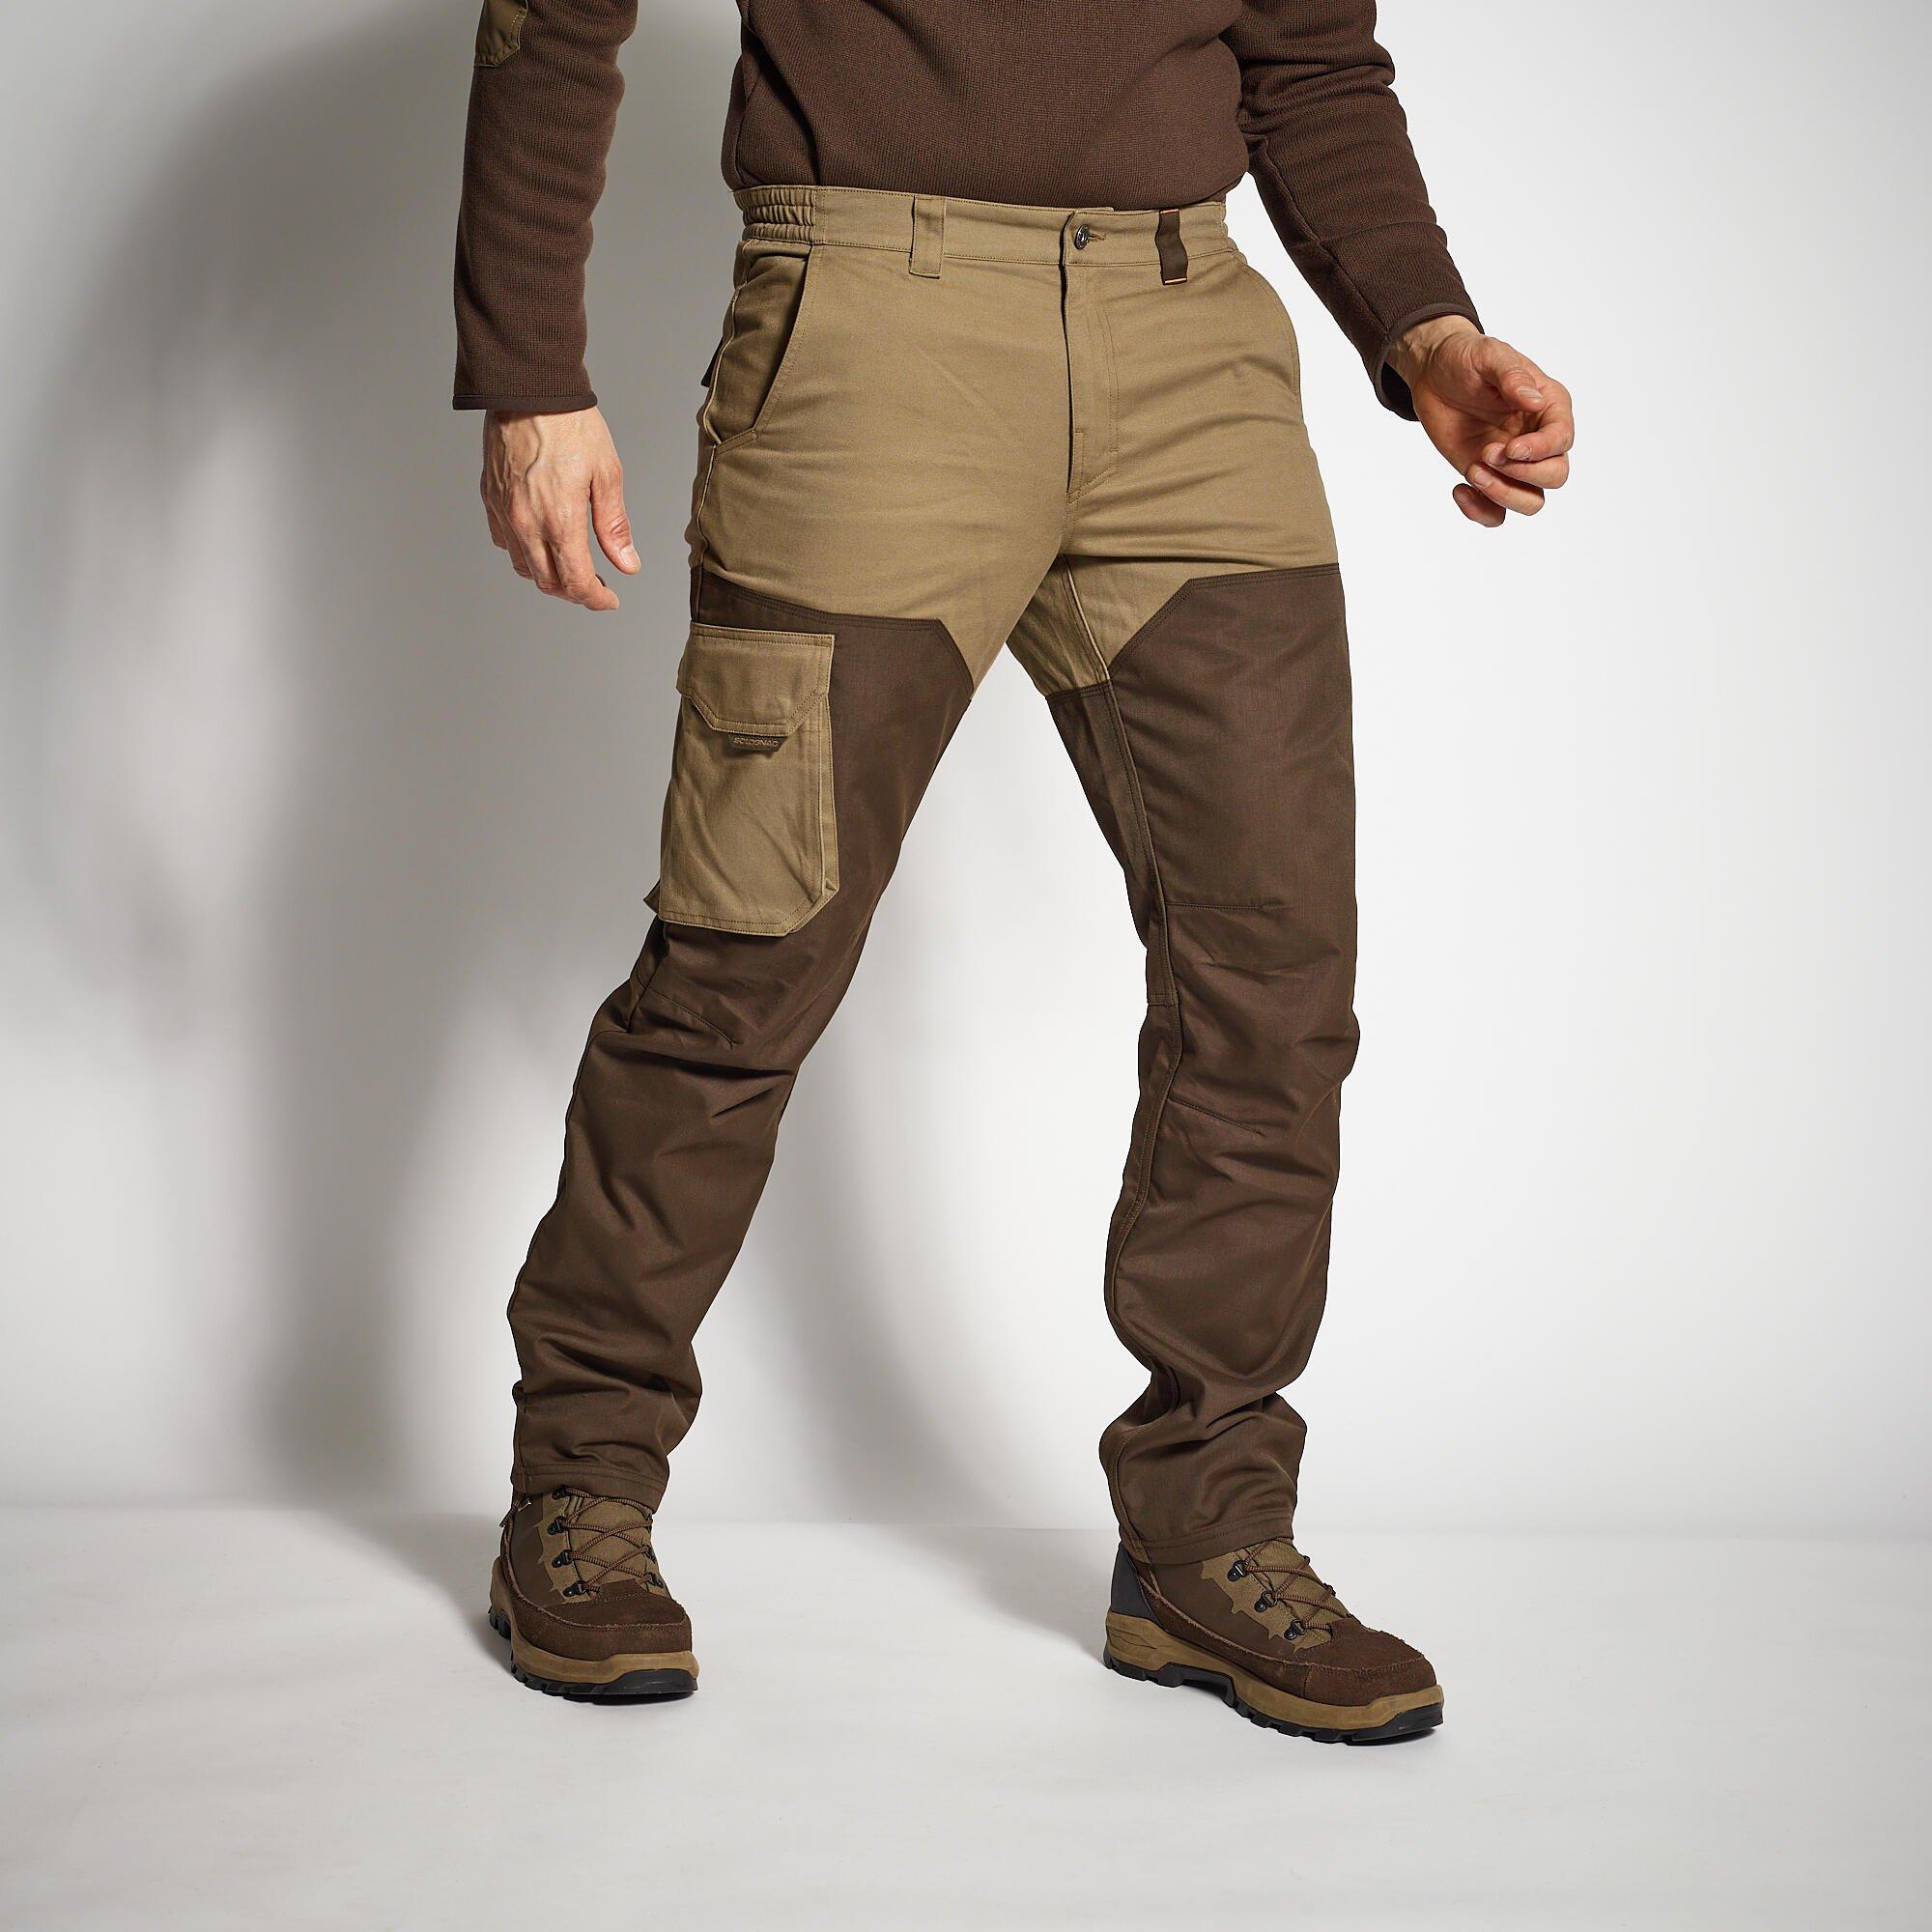 Decathlon Hunting Trousers Men (Highly Durable) - Solognac | Shopee Malaysia